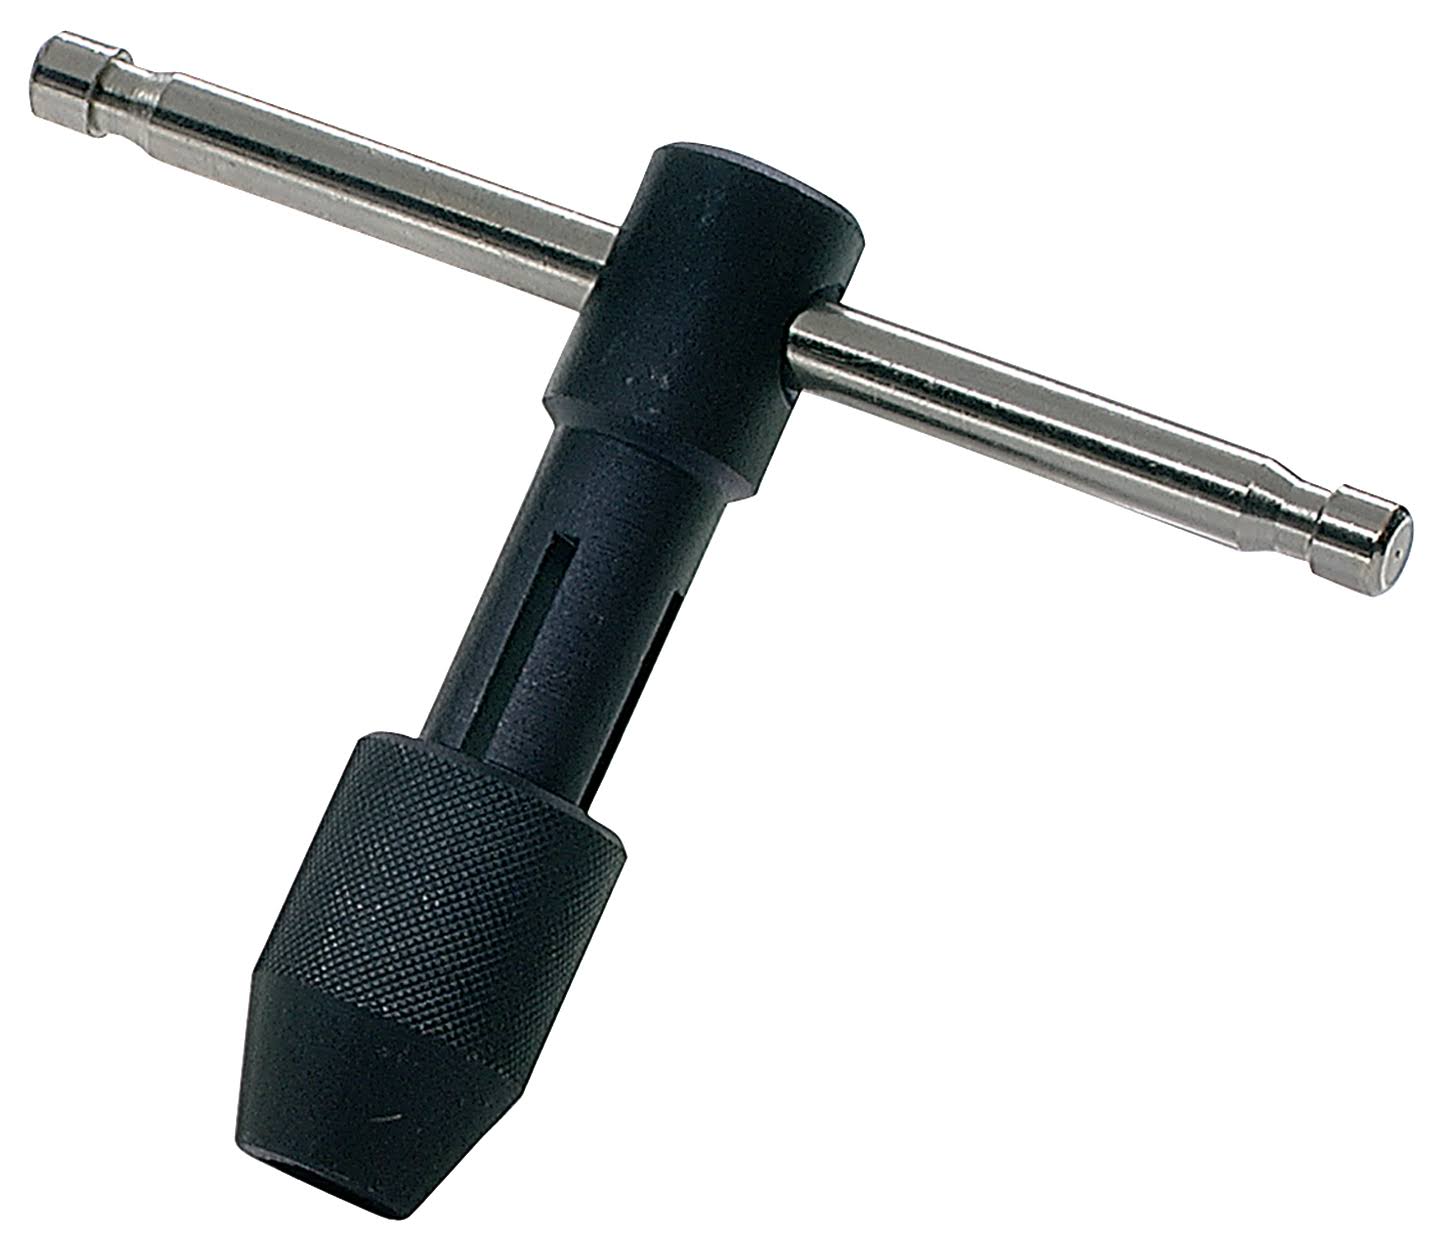 Irwin Industrial T-Handle Tap Wrench - 1/4in to 1/2in